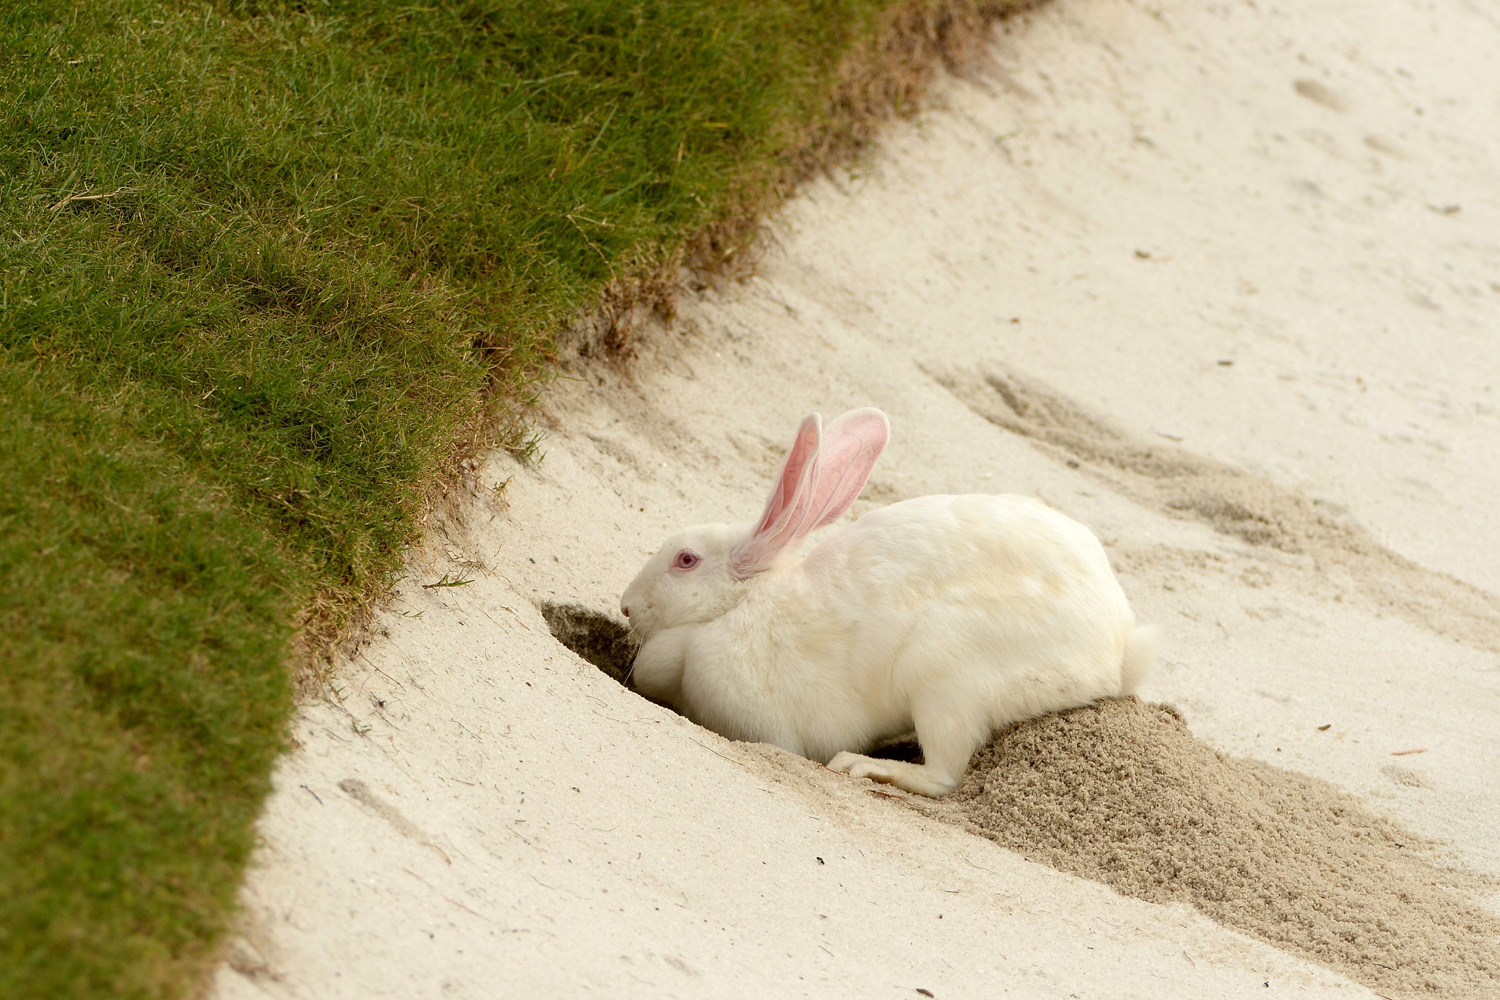 Oct. 31, 2013. A rabbit burrows into the side of during the practice bunker during the first round of the WGC - HSBC Champions at the Sheshan International Golf Club in Shanghai, China.